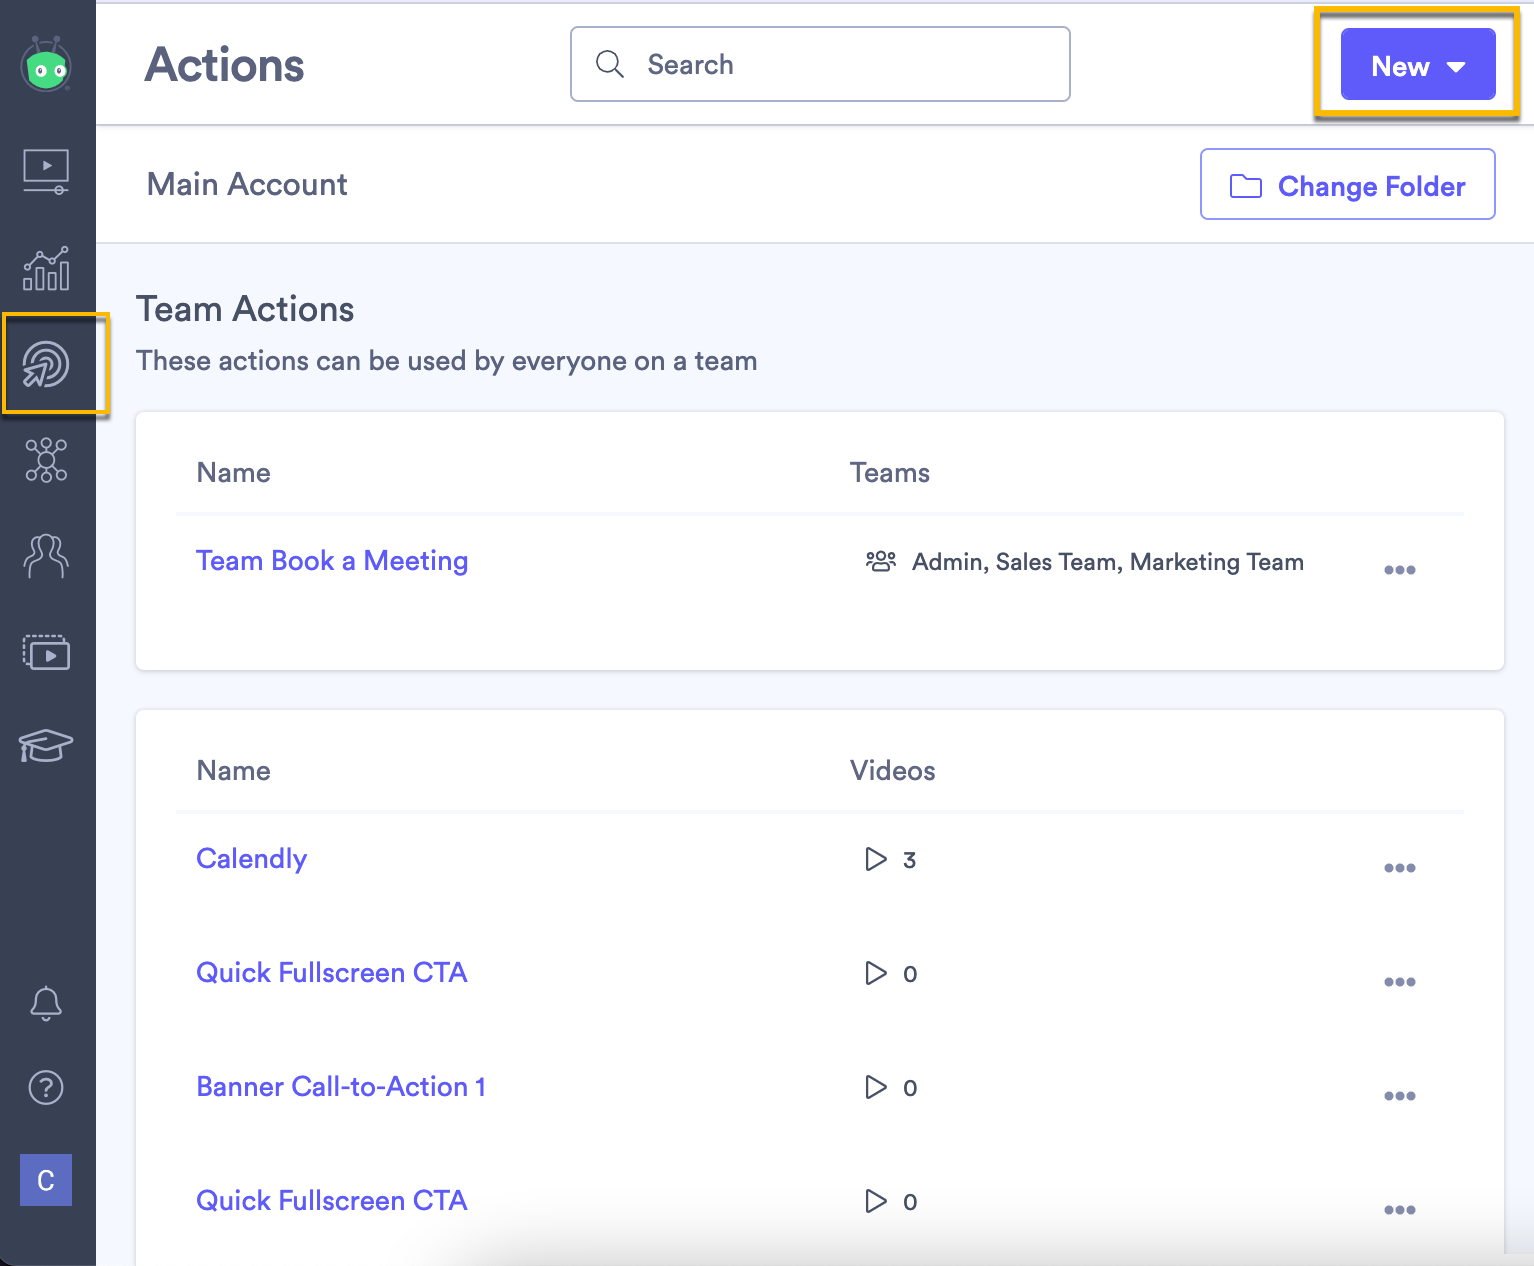 Library of Actions with New Action selected